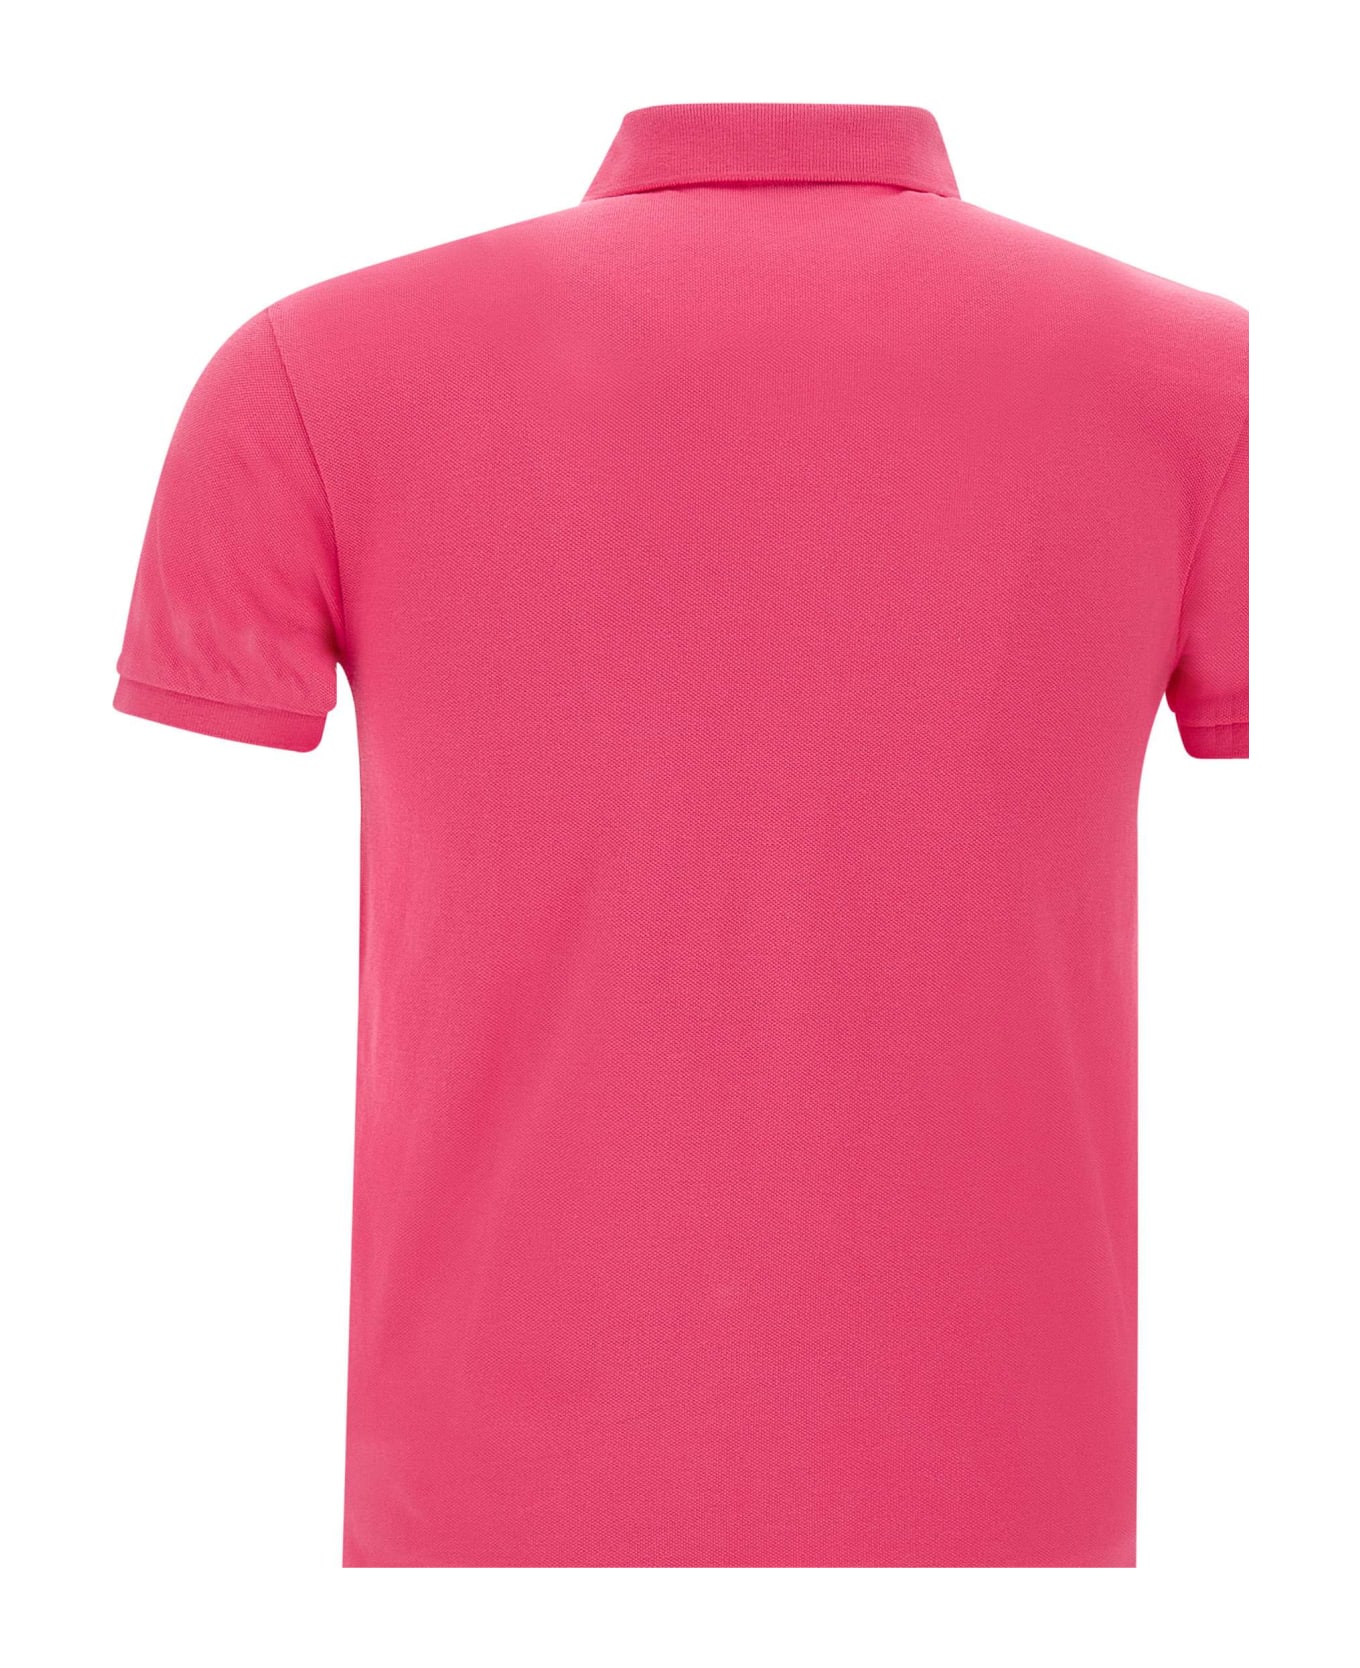 Polo Ralph Lauren Fuchsia And White Slim-fit Pique Polo Shirt - Pink ポロシャツ